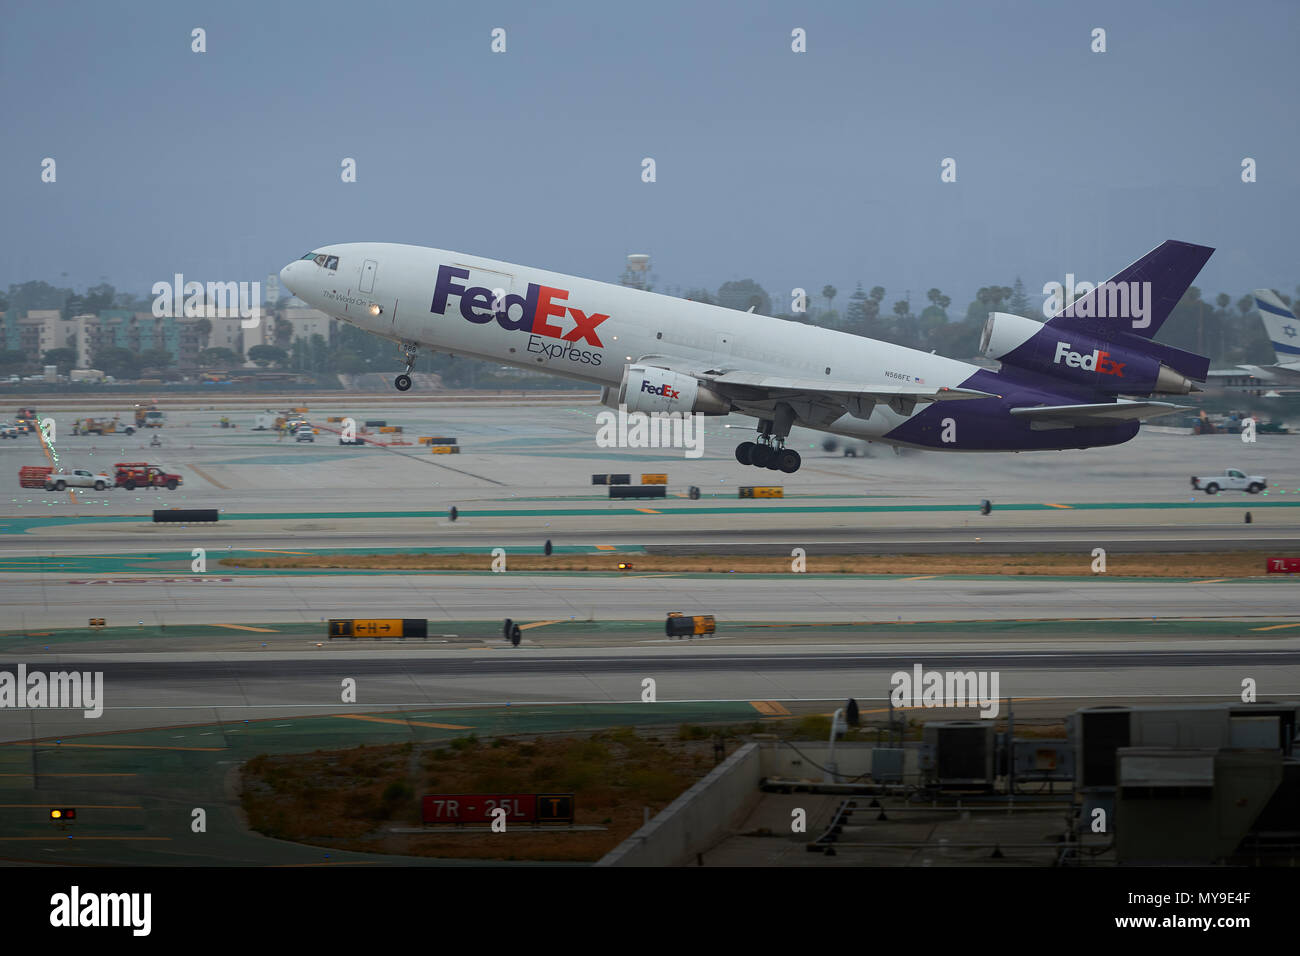 FedEx Express DC-10 Cargo Plane Taking Off From Los Angeles International Airport, LAX, California, USA. Stock Photo